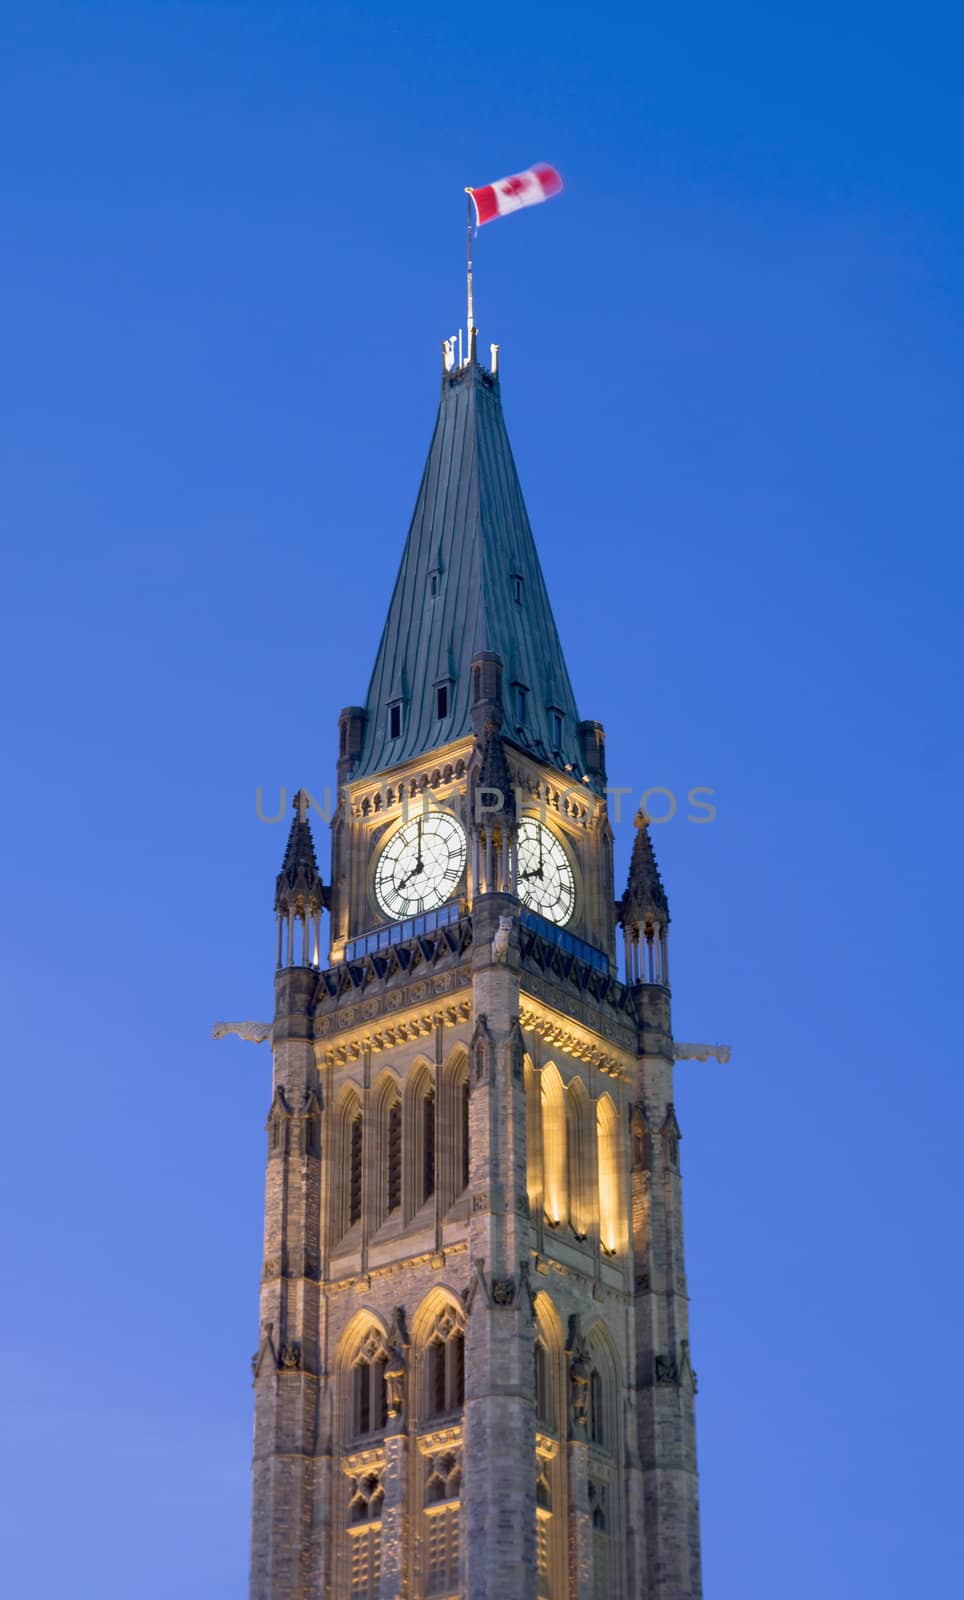 The canadian Parliament Centre Block showing 8 O'Clock.